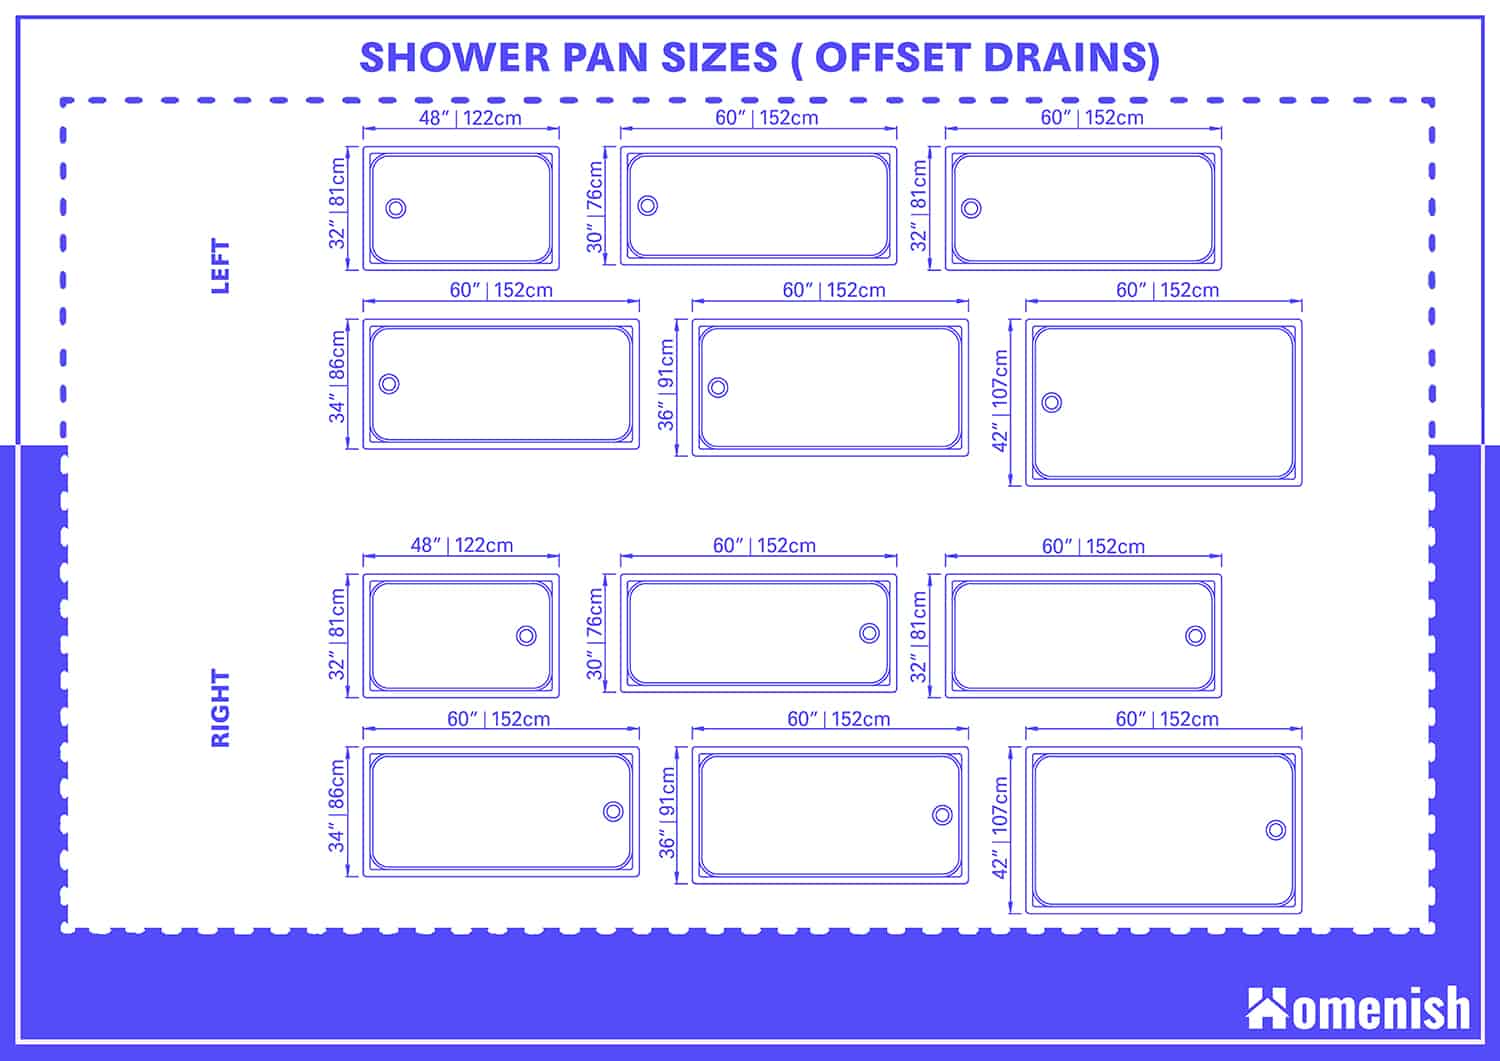 Shower Pan Sizes (Offset Drains)